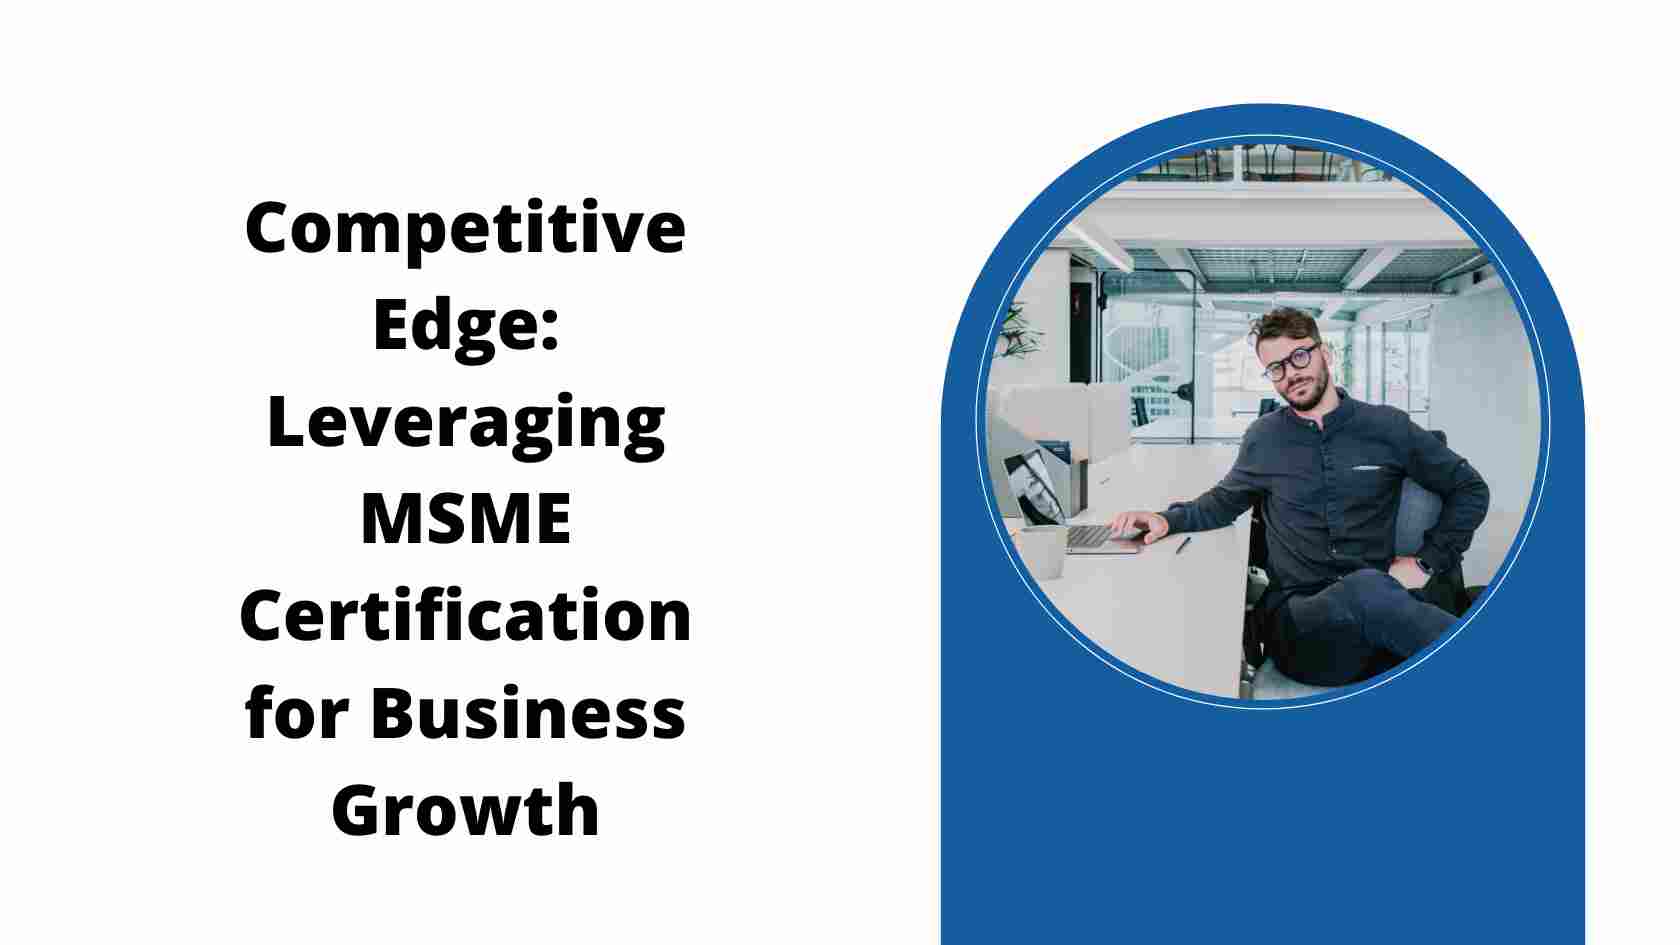 Competitive Edge Leveraging MSME Certification for Business Growth